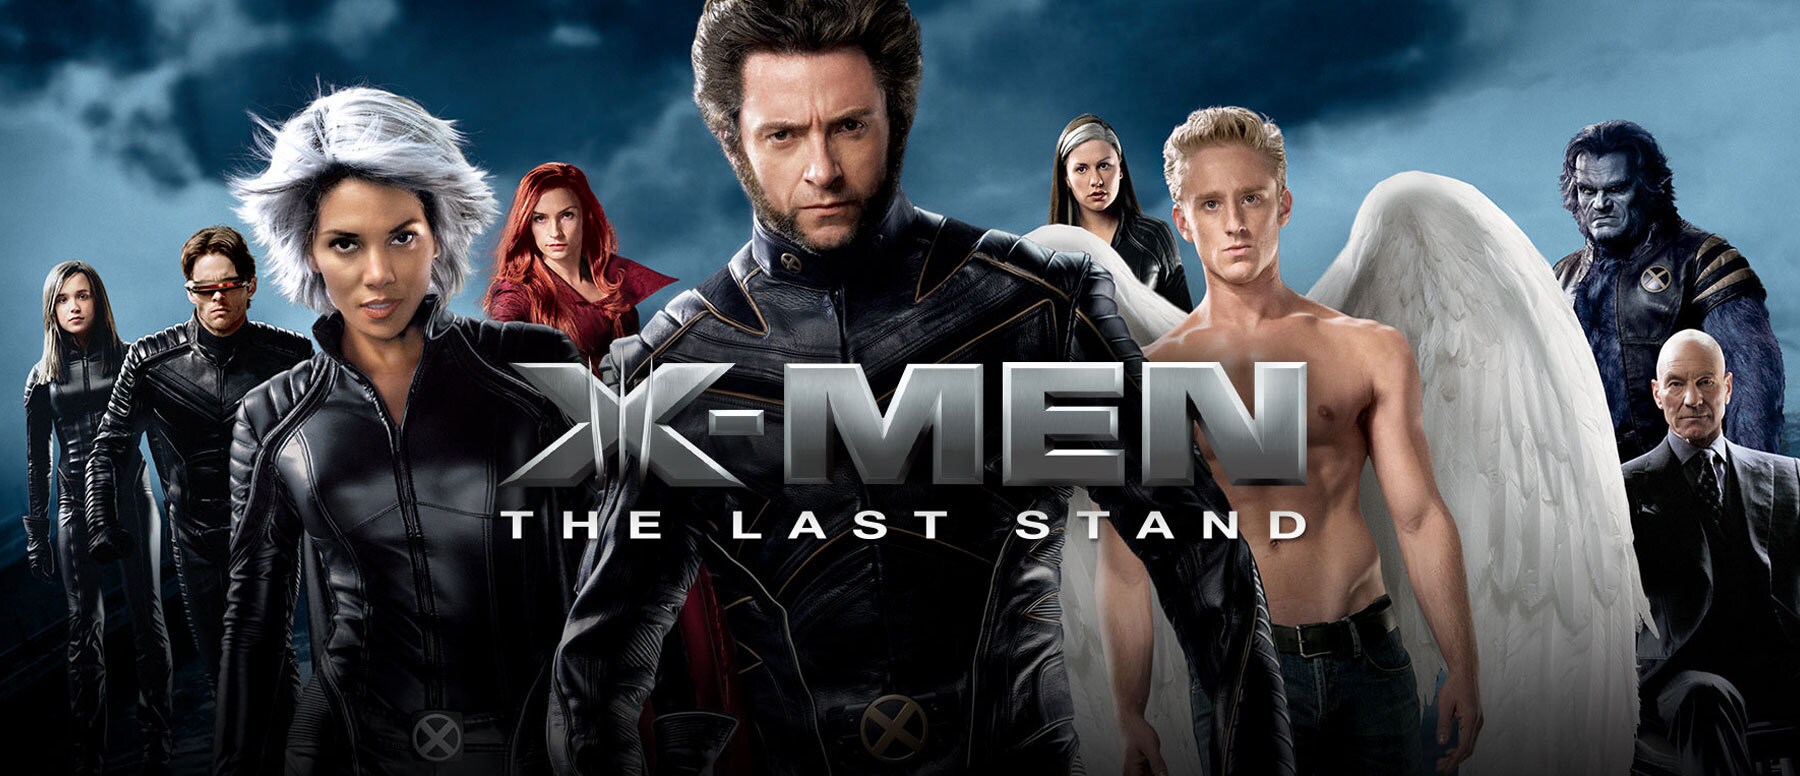 44-facts-about-the-movie-x-men-the-last-stand